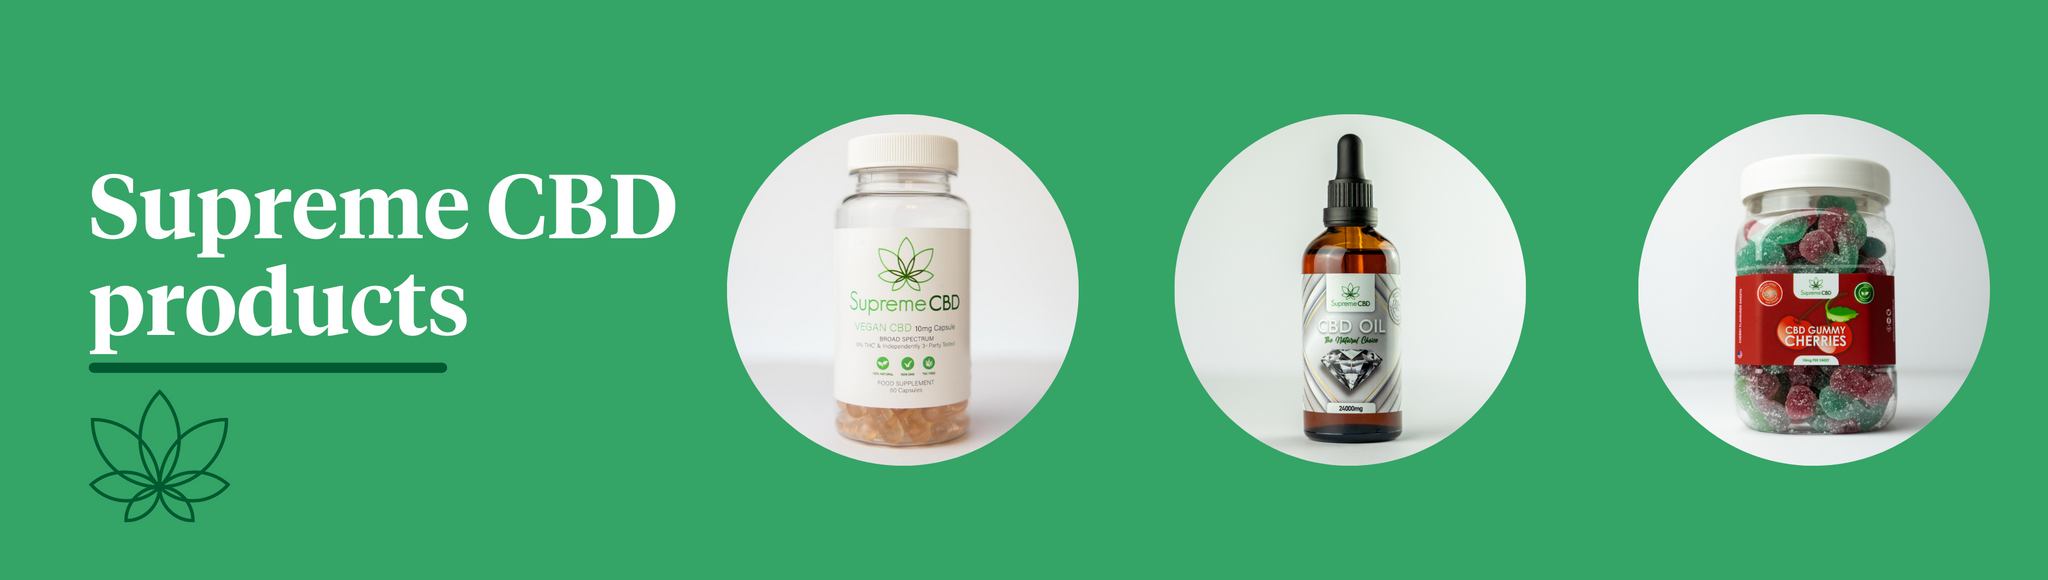 A green background showcasing three highly regarded products by Supreme CBD, the Supreme CBD capsules, the Supreme CBD oil and the Supreme CBD gummies.